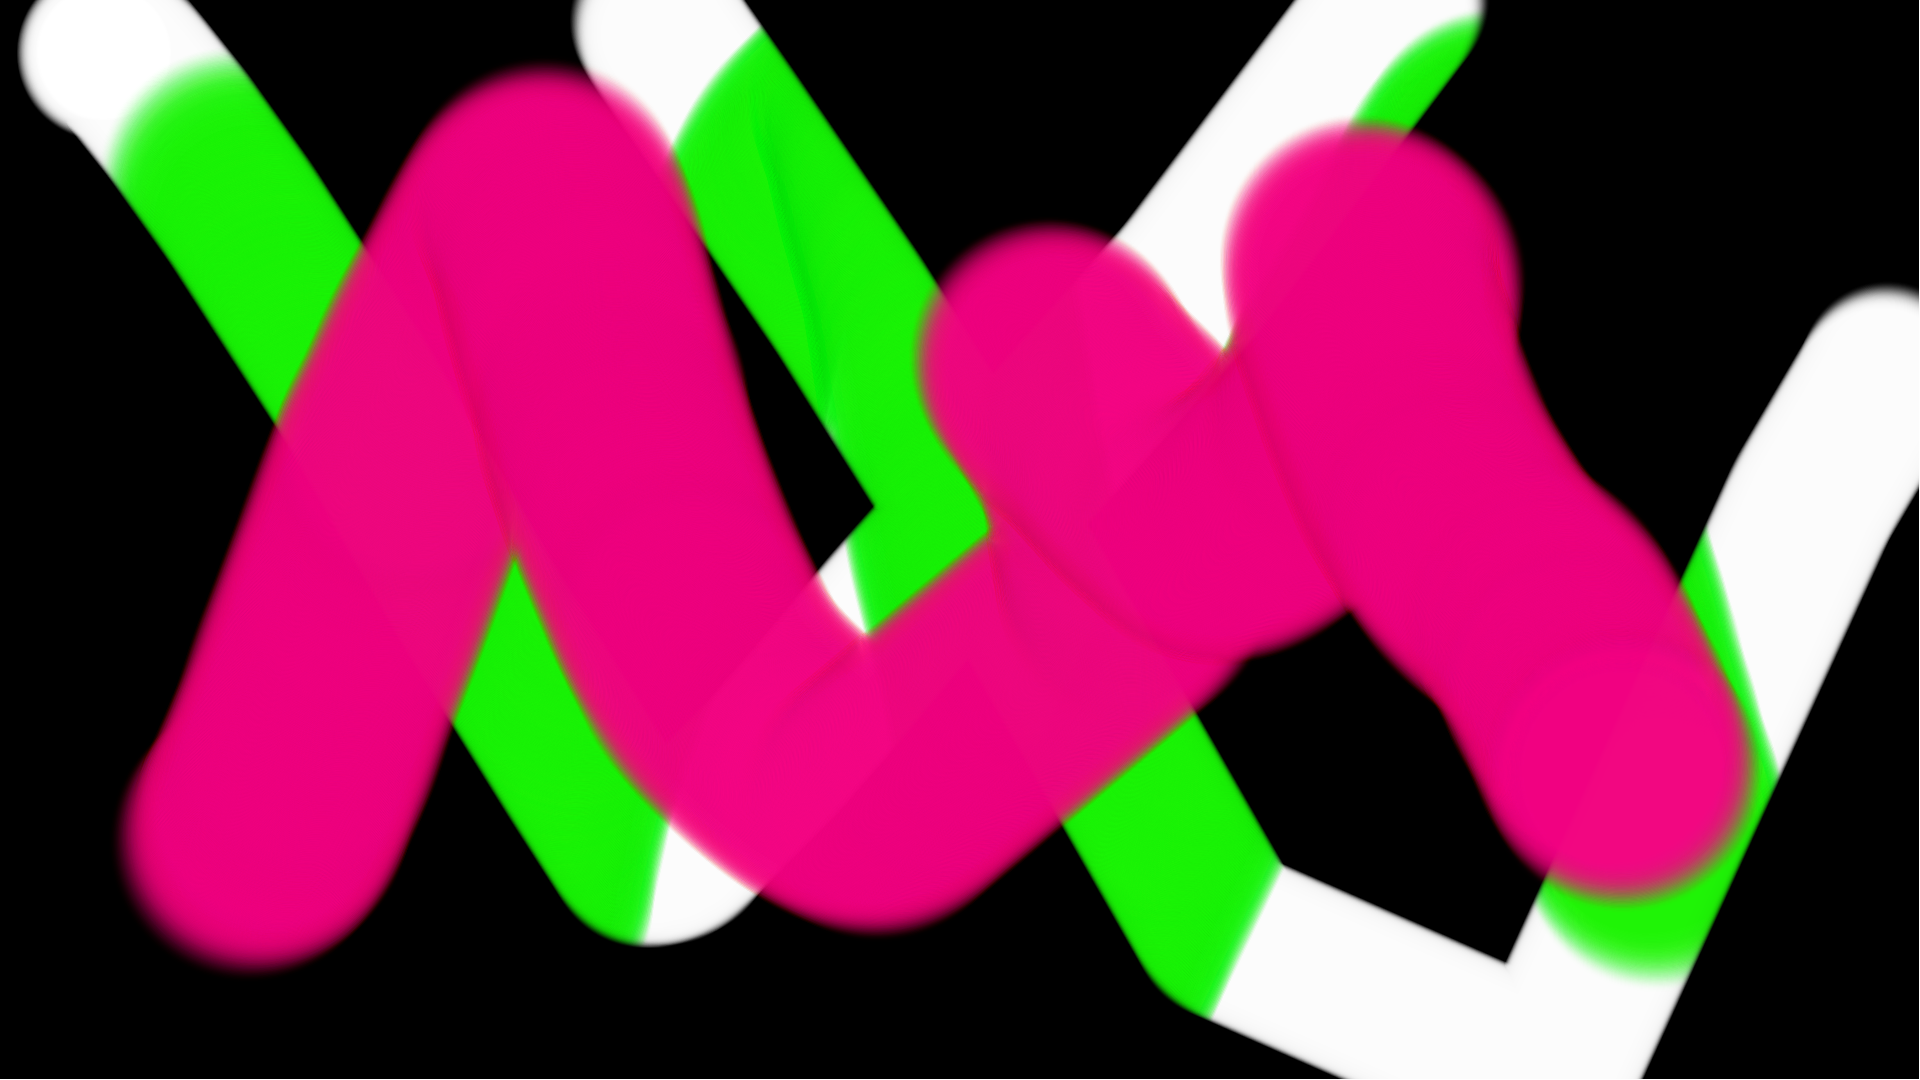 NeonSquiggles - created by Steve Lougheed with paint